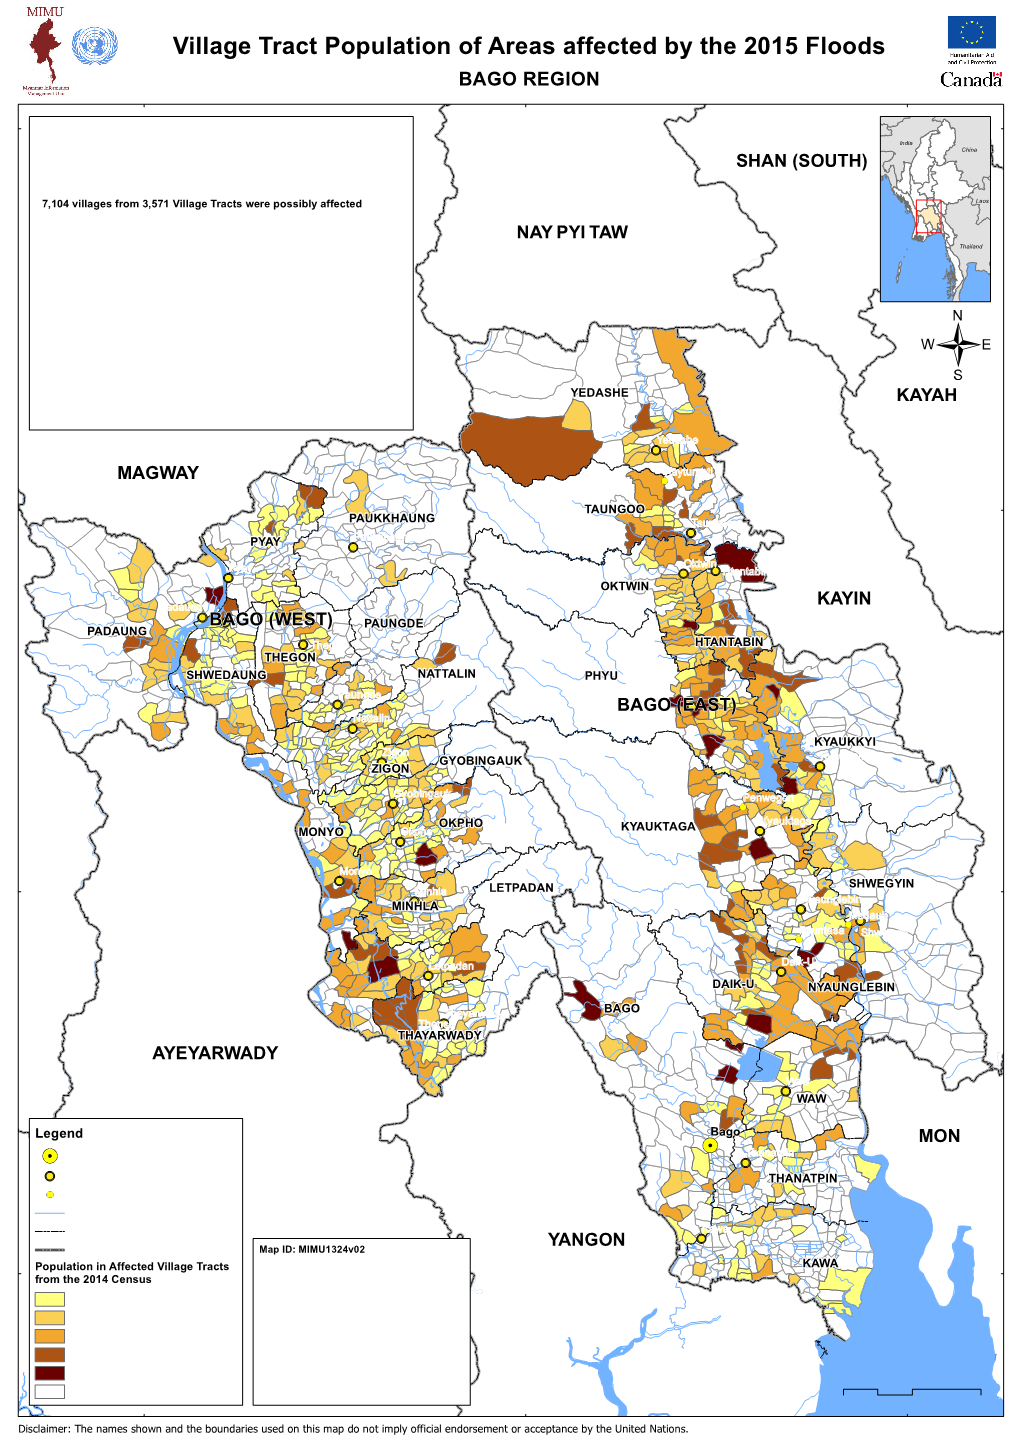 Village Tract Population of Areas Affected by the 2015 Floods BAGO REGION